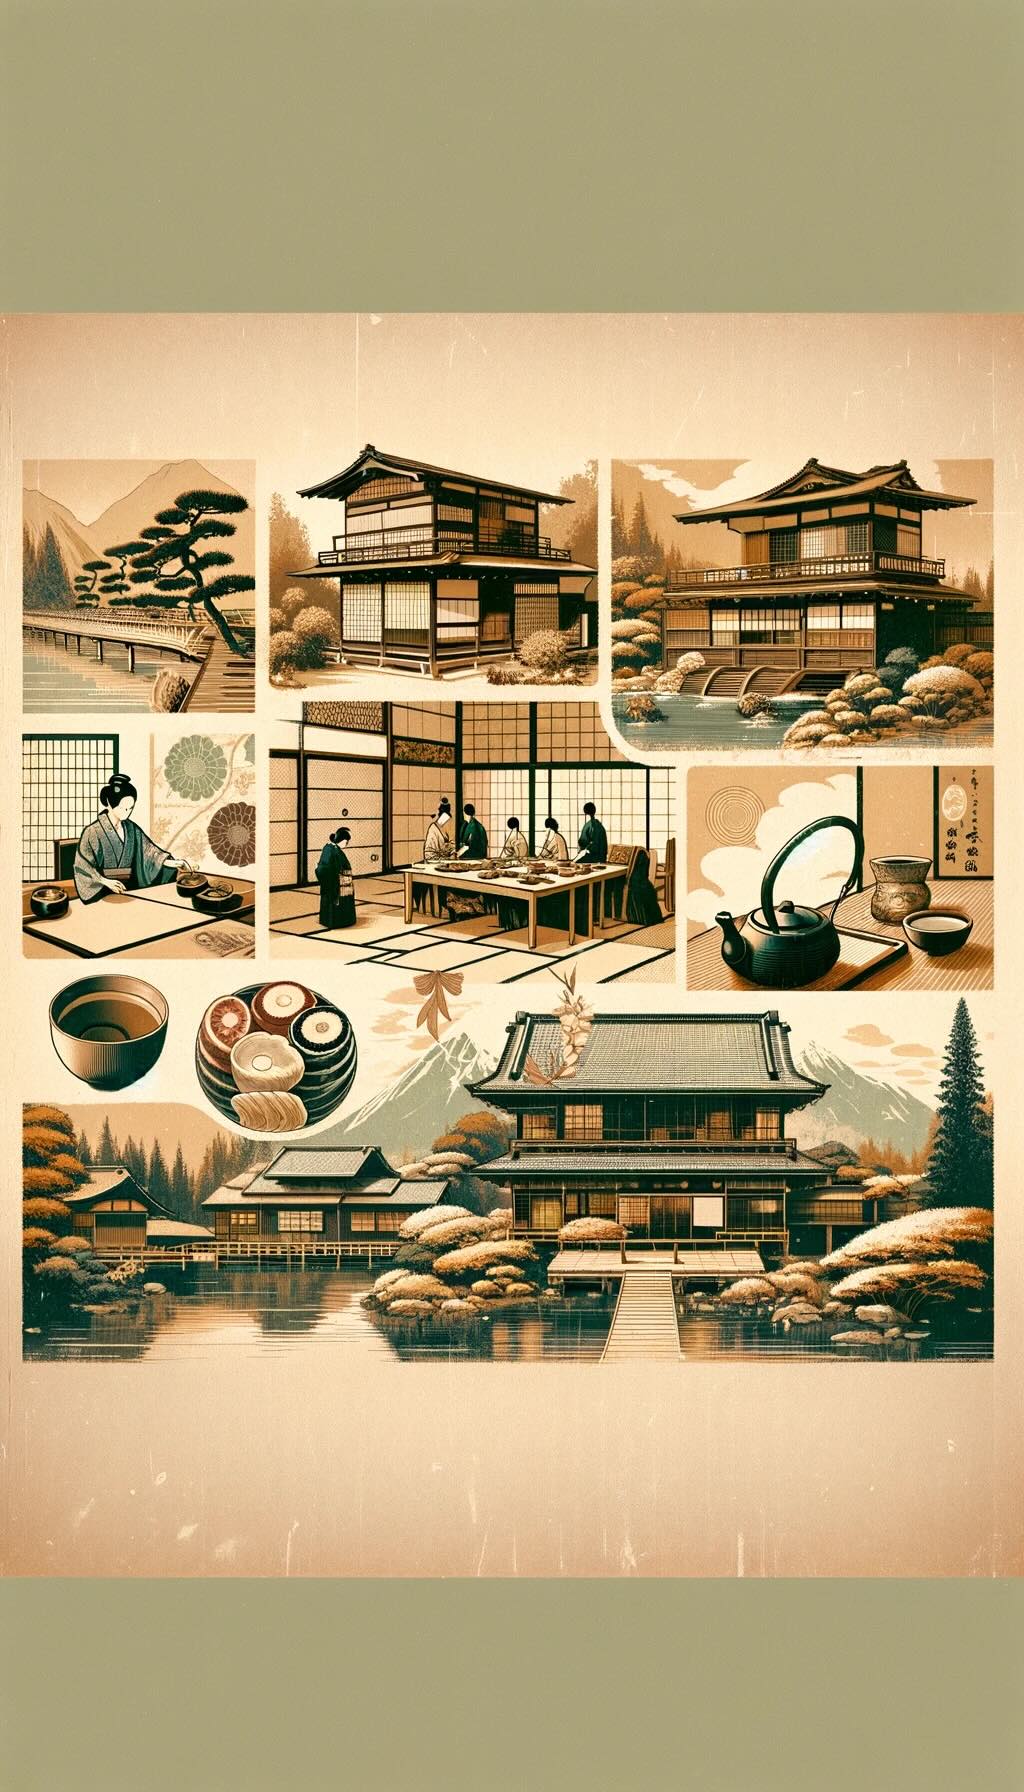 Evolution and cultural significance of ryokans, traditional Japanese inns. This collage melds various elements representing the history and essence of ryokans, including scenes of tatami rooms, tea ceremonies, and meticulously curated gardens, symbolizing aesthetic values such as 'wabi-sabi' and 'ma'. It also features scenes of a 'kaiseki' meal, highlighting the culinary heritage and artistic expression of local ingredients. This artwork beautifully emphasizes the transition of ryokans from simple lodgings to embodiments of Japanese culture, showcasing their simplicity, connection with nature, and the passage of time